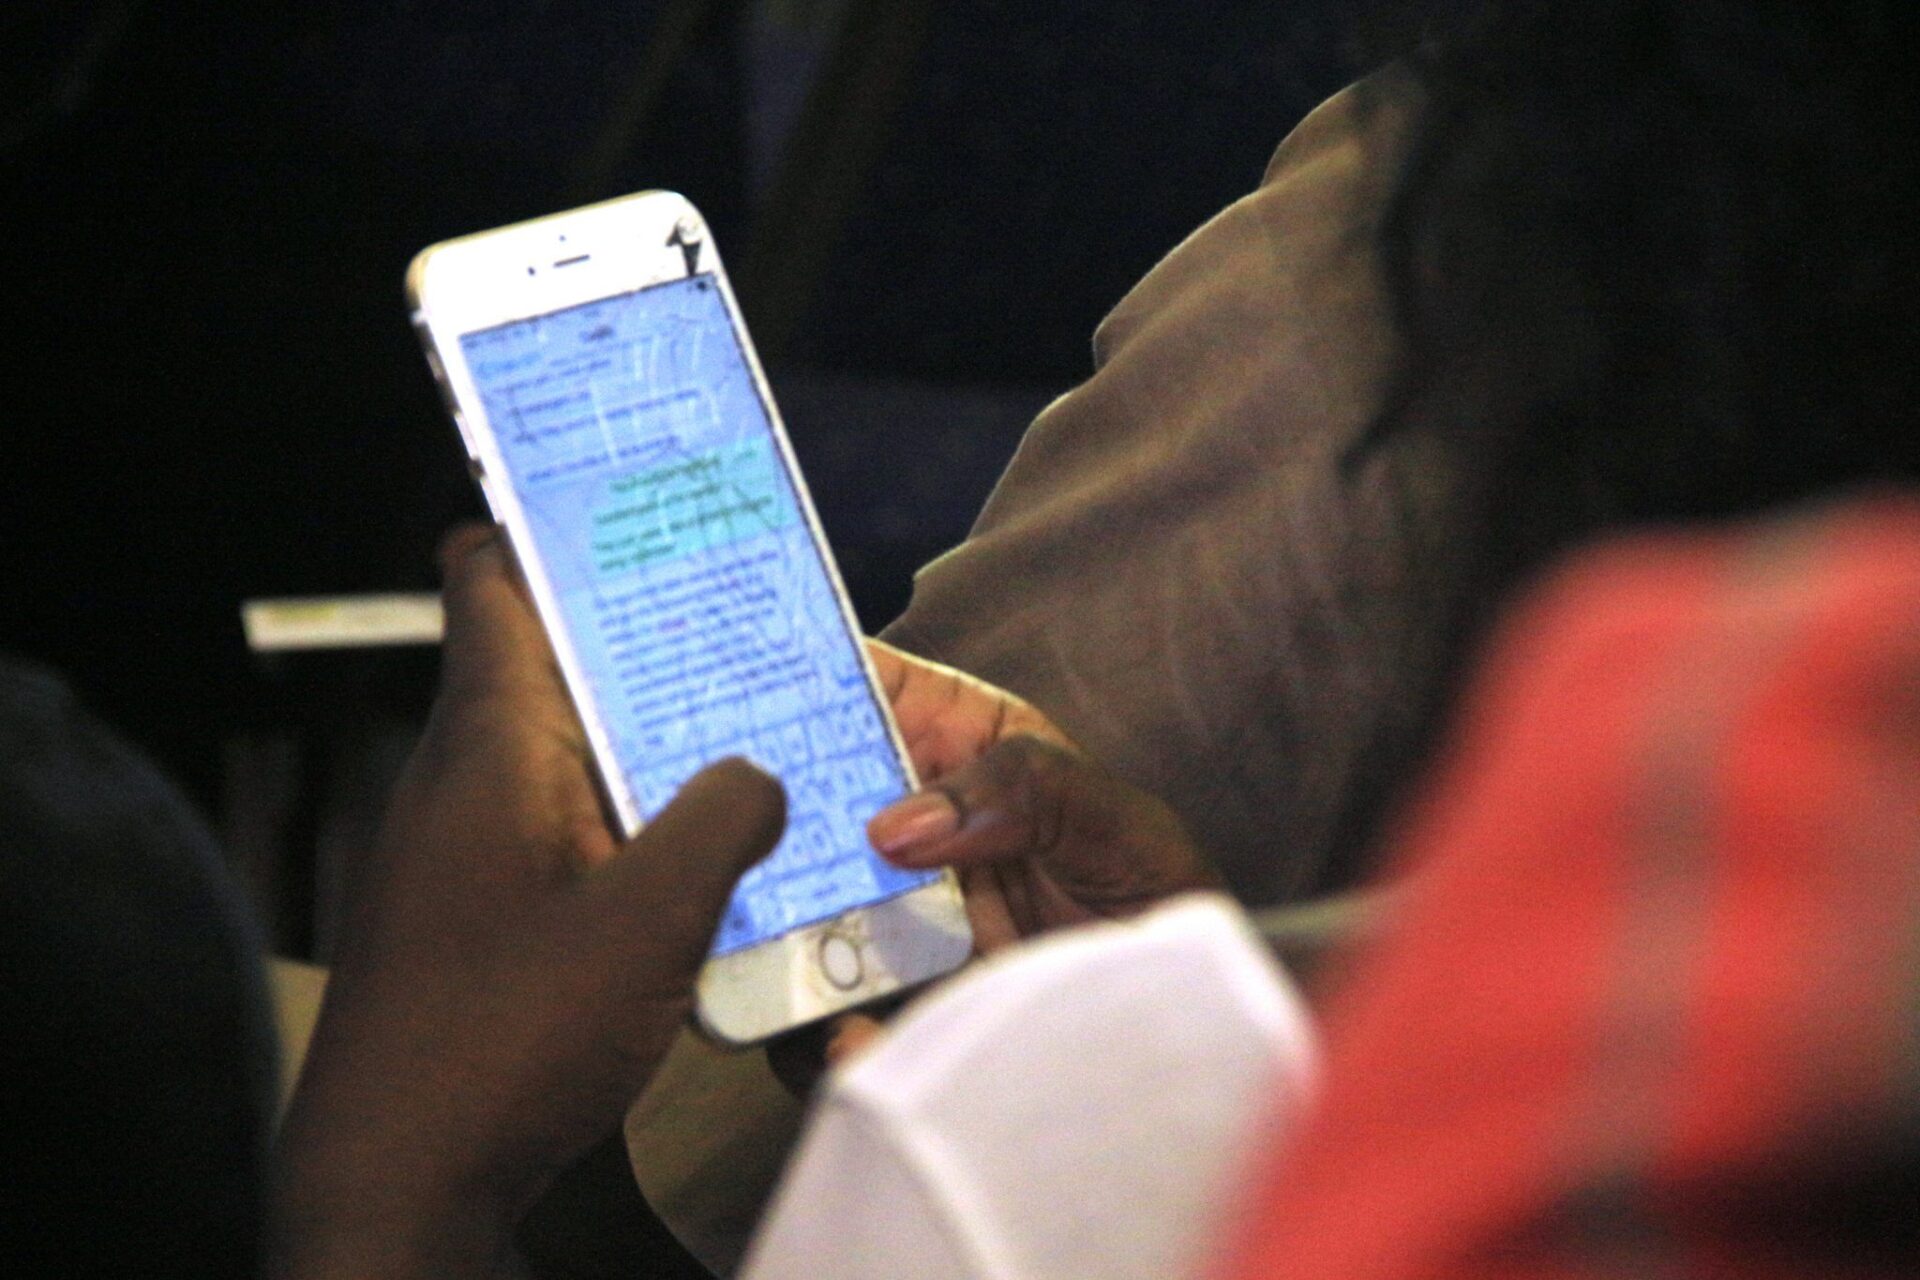 Unsolicited messages: Telcos to build ‘Do Not Disturb’ shield, NCC says